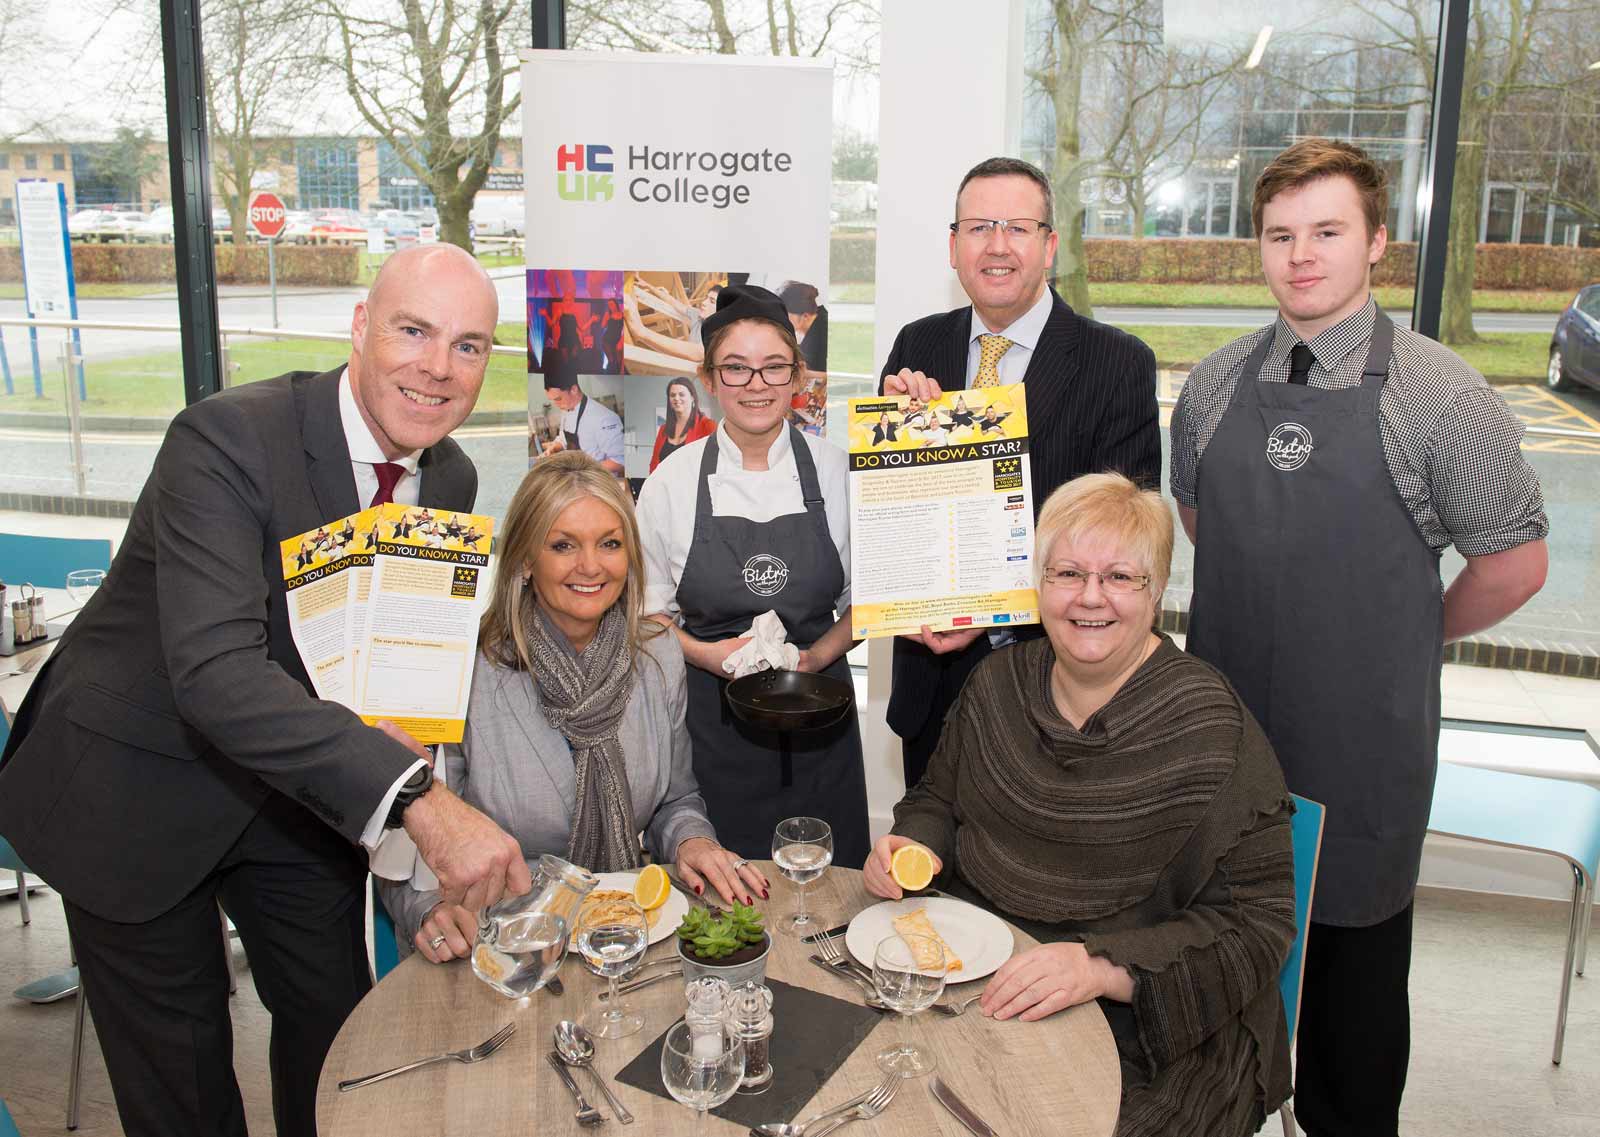 David Ritson, General Manager of the Old Swan hotel and Chair of Destination Harrogate, Debbie Forsyth Conroy Harrogate College Principal, Level 2 Hospitality and Catering students Chef - Hazel Warters and Waiter - Tom-Taylor Scaife, Sandra Doherty, Chief Executive Harrogate District Chamber of Commerce and Simon Cotton General Manager of the Cedar Court hotel and awards organiser enjoy pancakes cooked by the students at Harrogate College